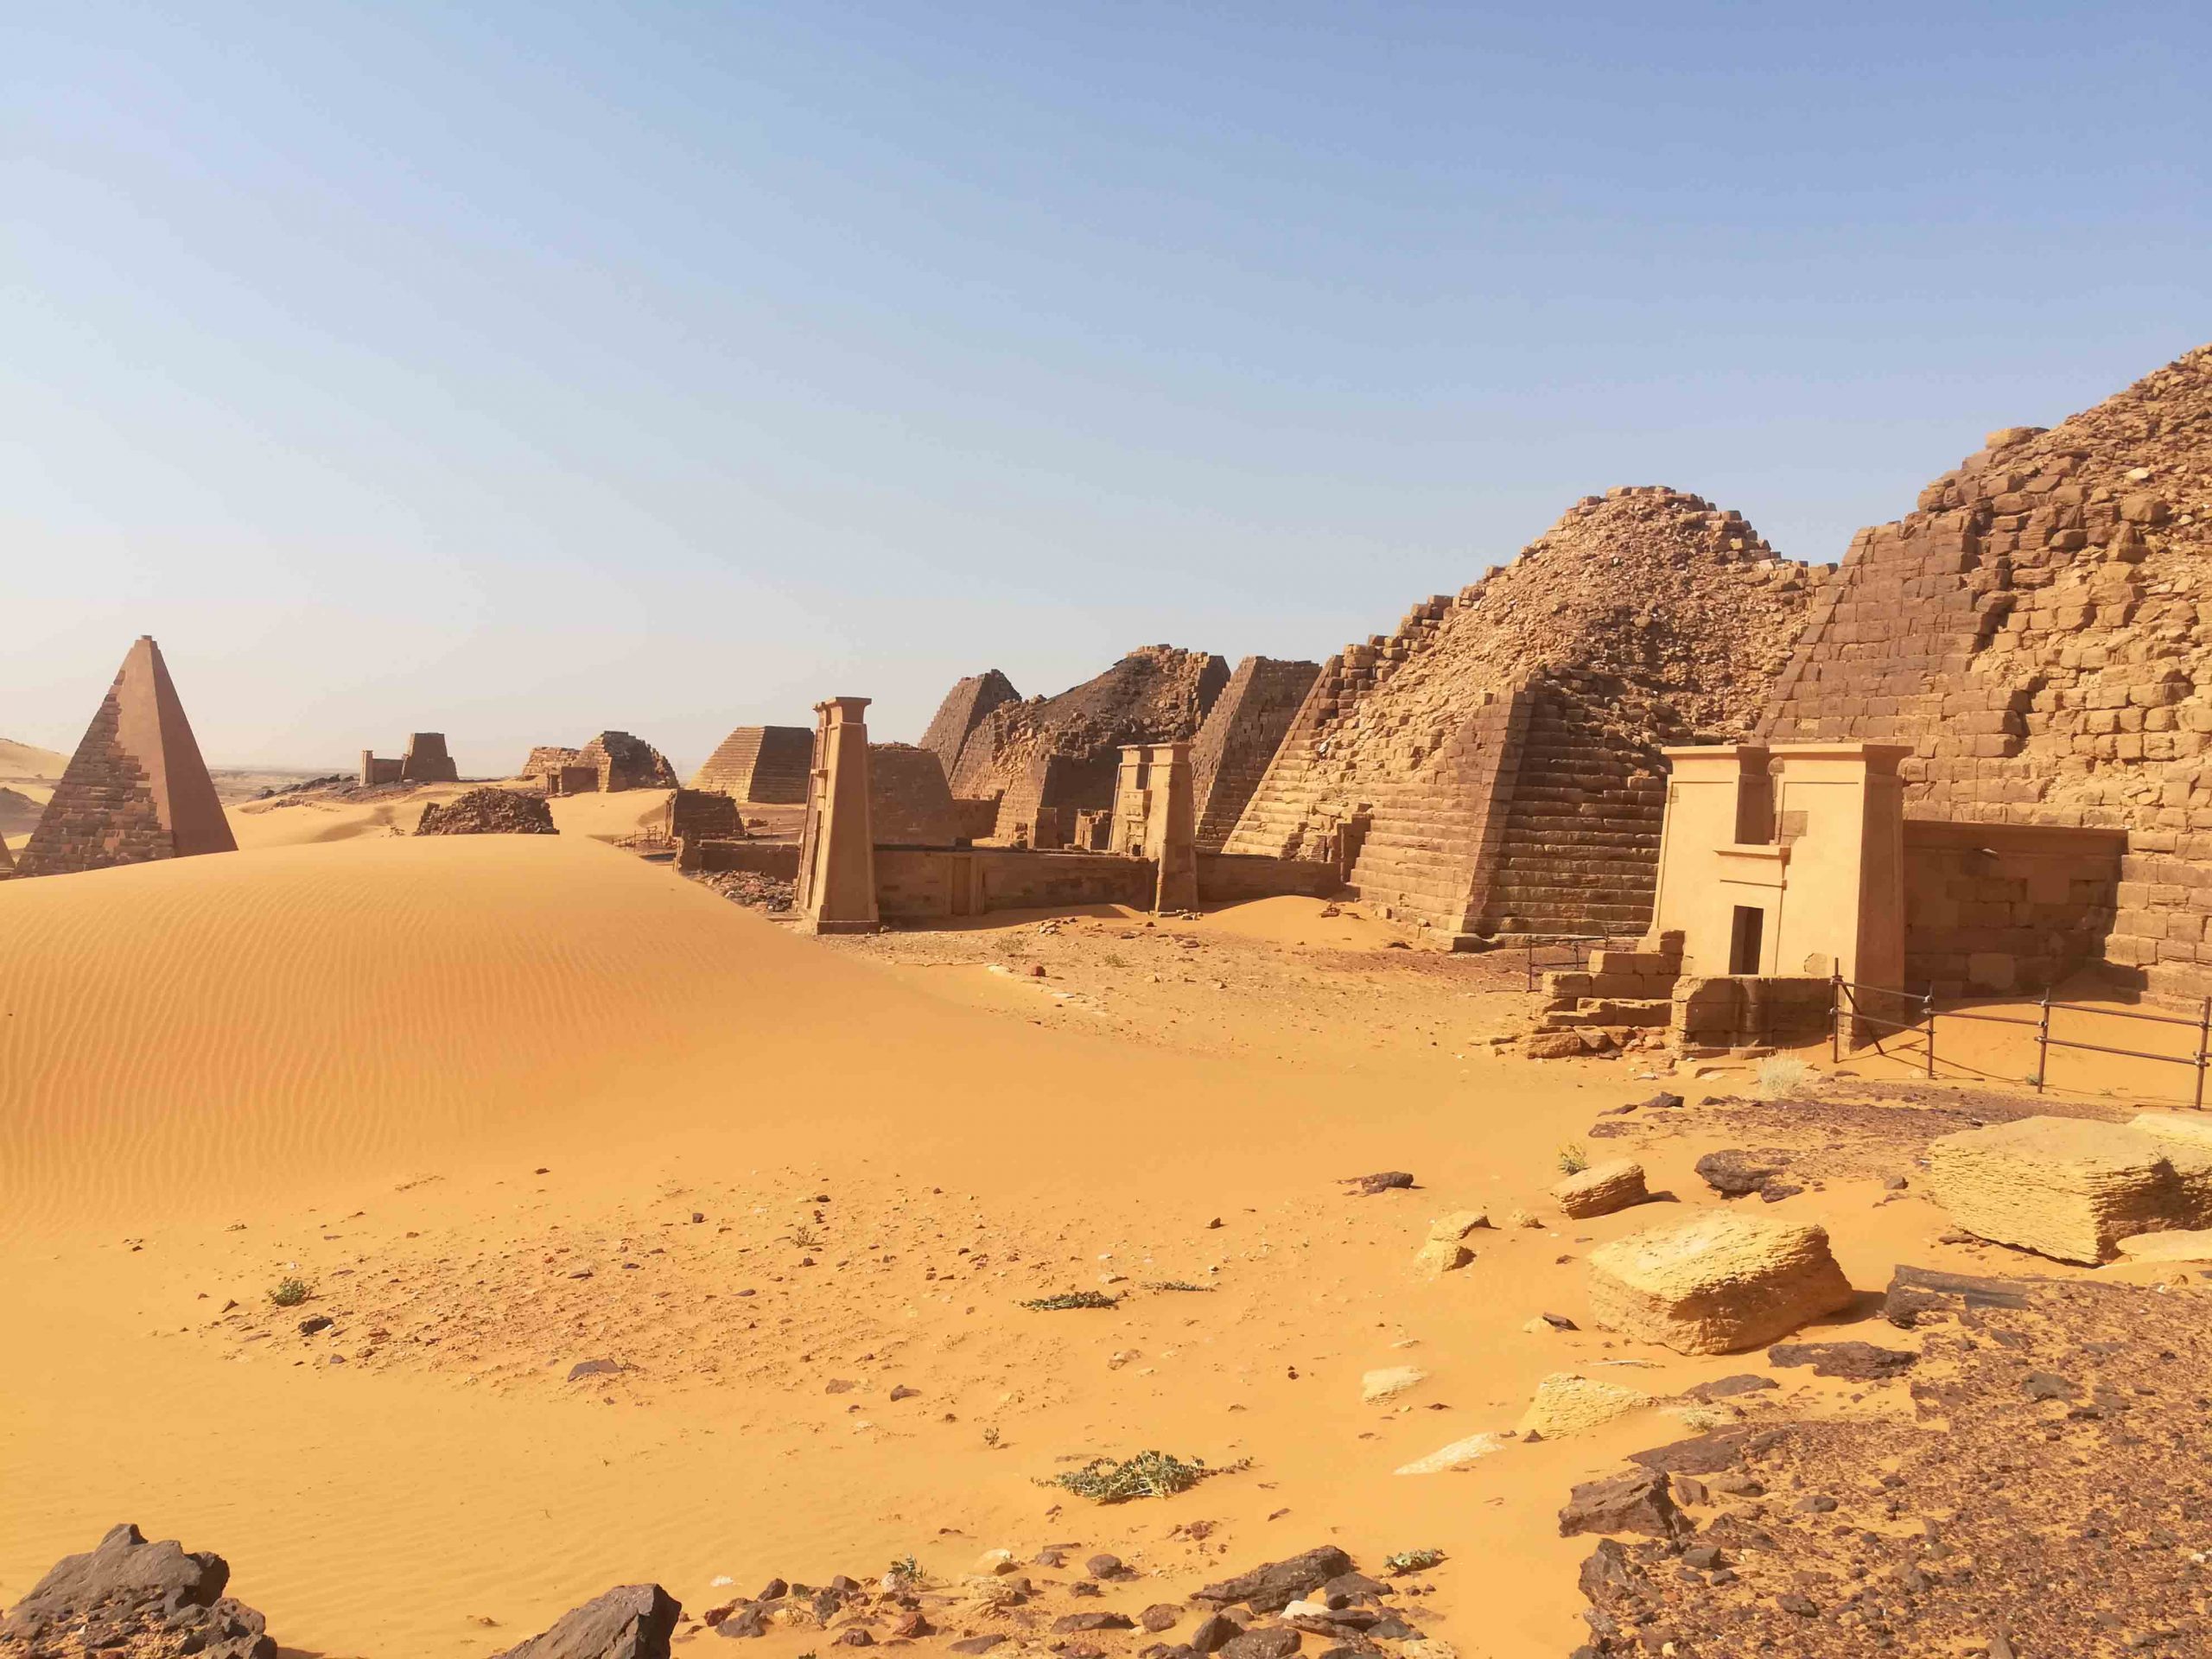 Travel Sudan Tours Your Local Tour Guide to Sudan